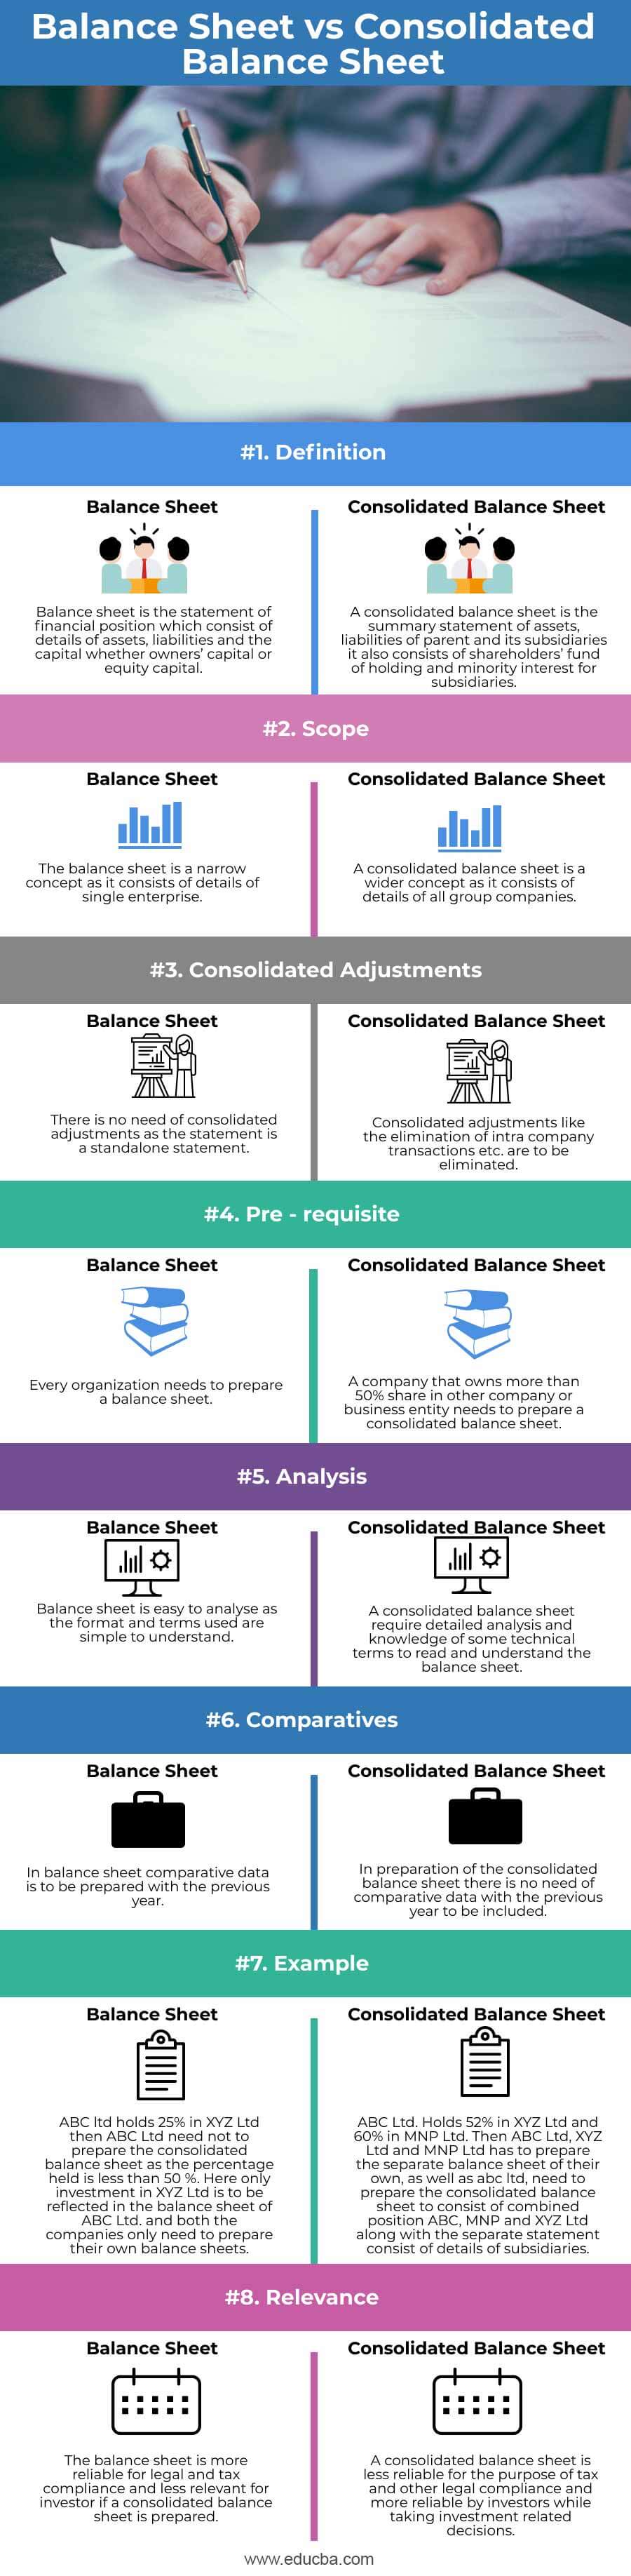 balance sheet vs consolidated top 8 comparison to learn ppc financial statements accounting ratio formulas